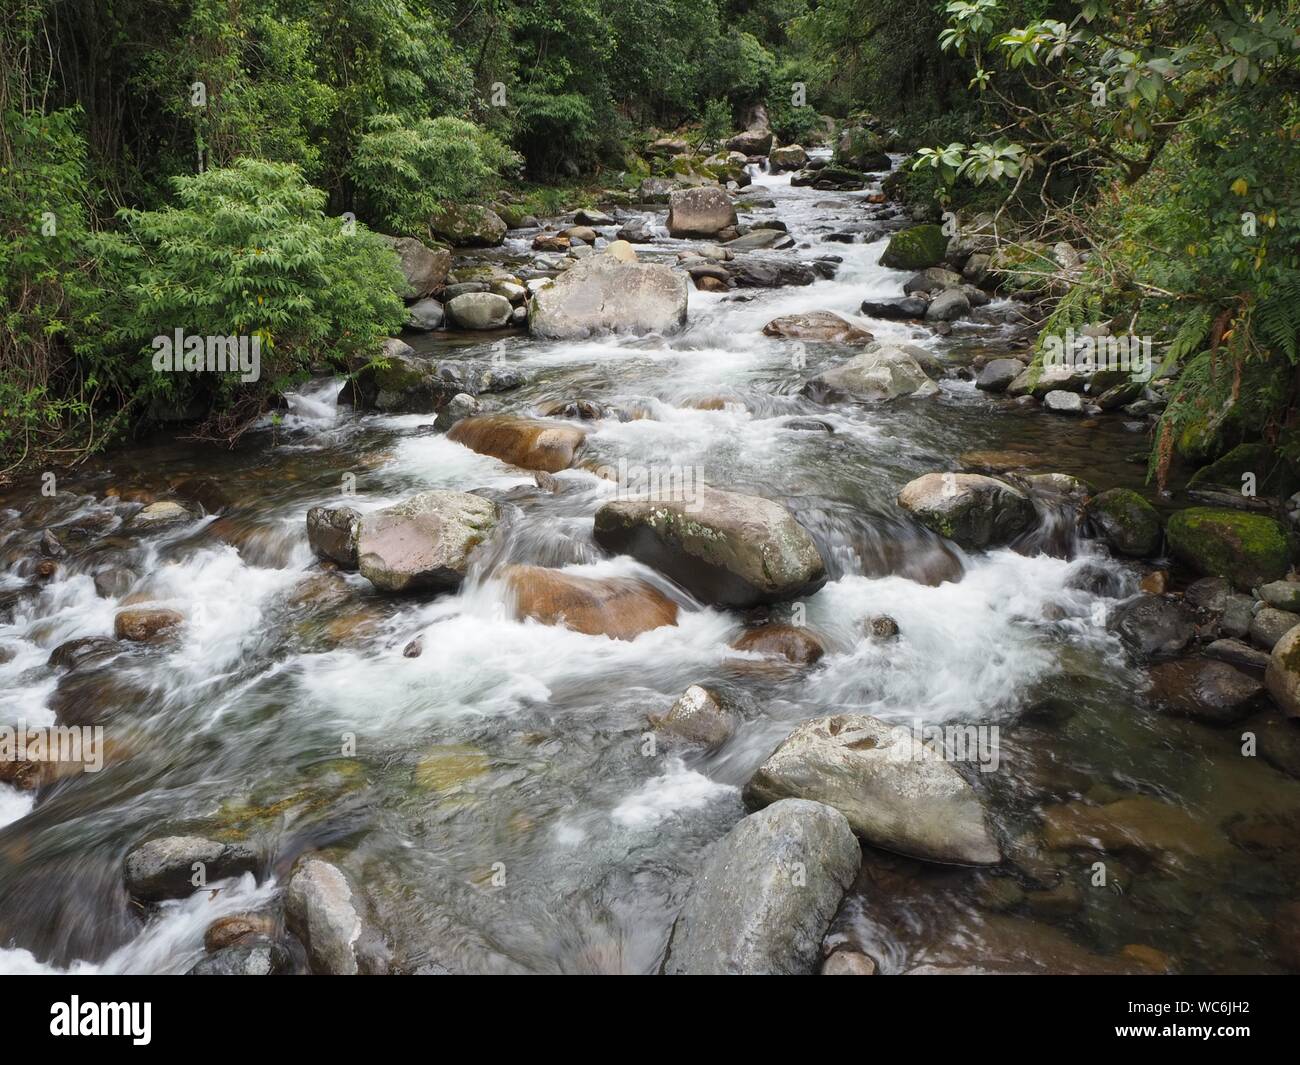 Tropical rainforest and jungle river or stream flowing fast with white water inthe forest near Boquete in Panama. Close to Wendys water falls. Stock Photo